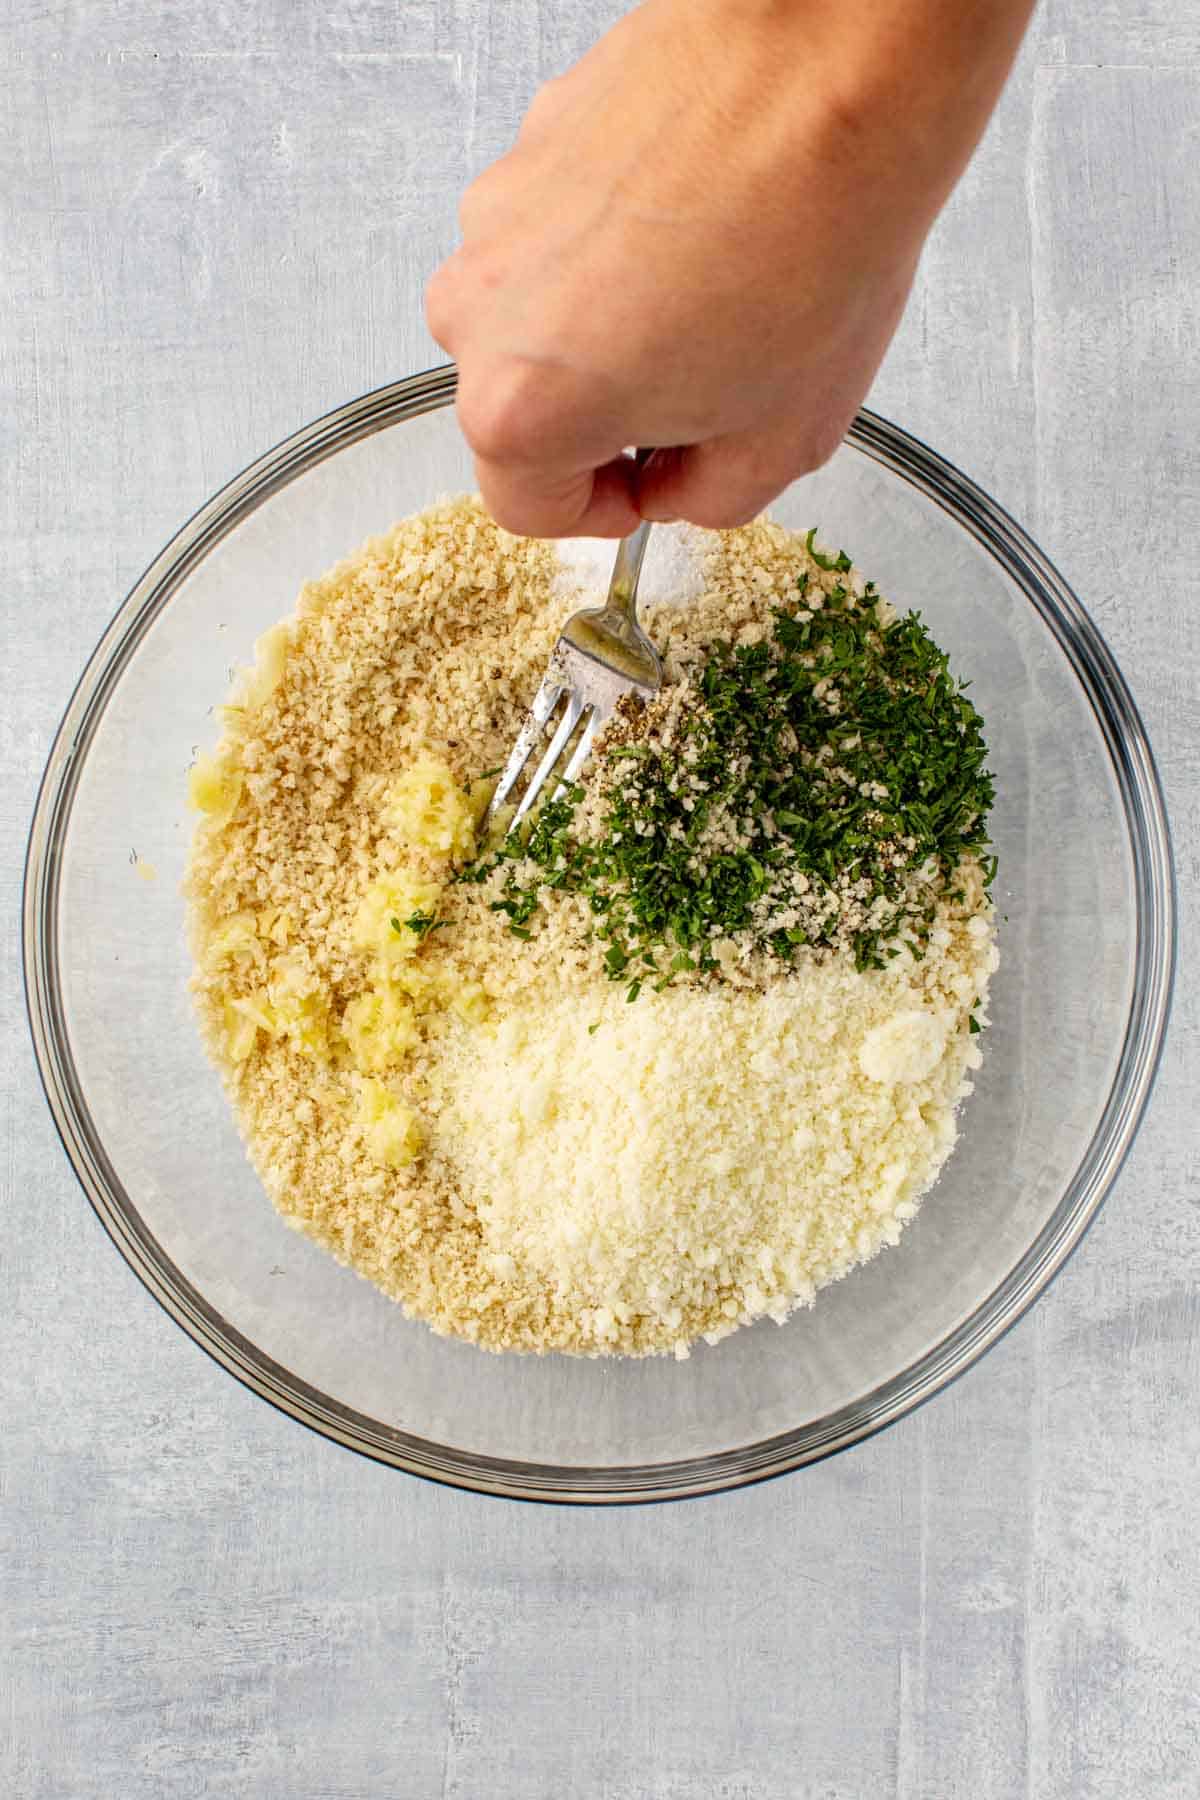 Mixing breadcrumbs together with a fork.